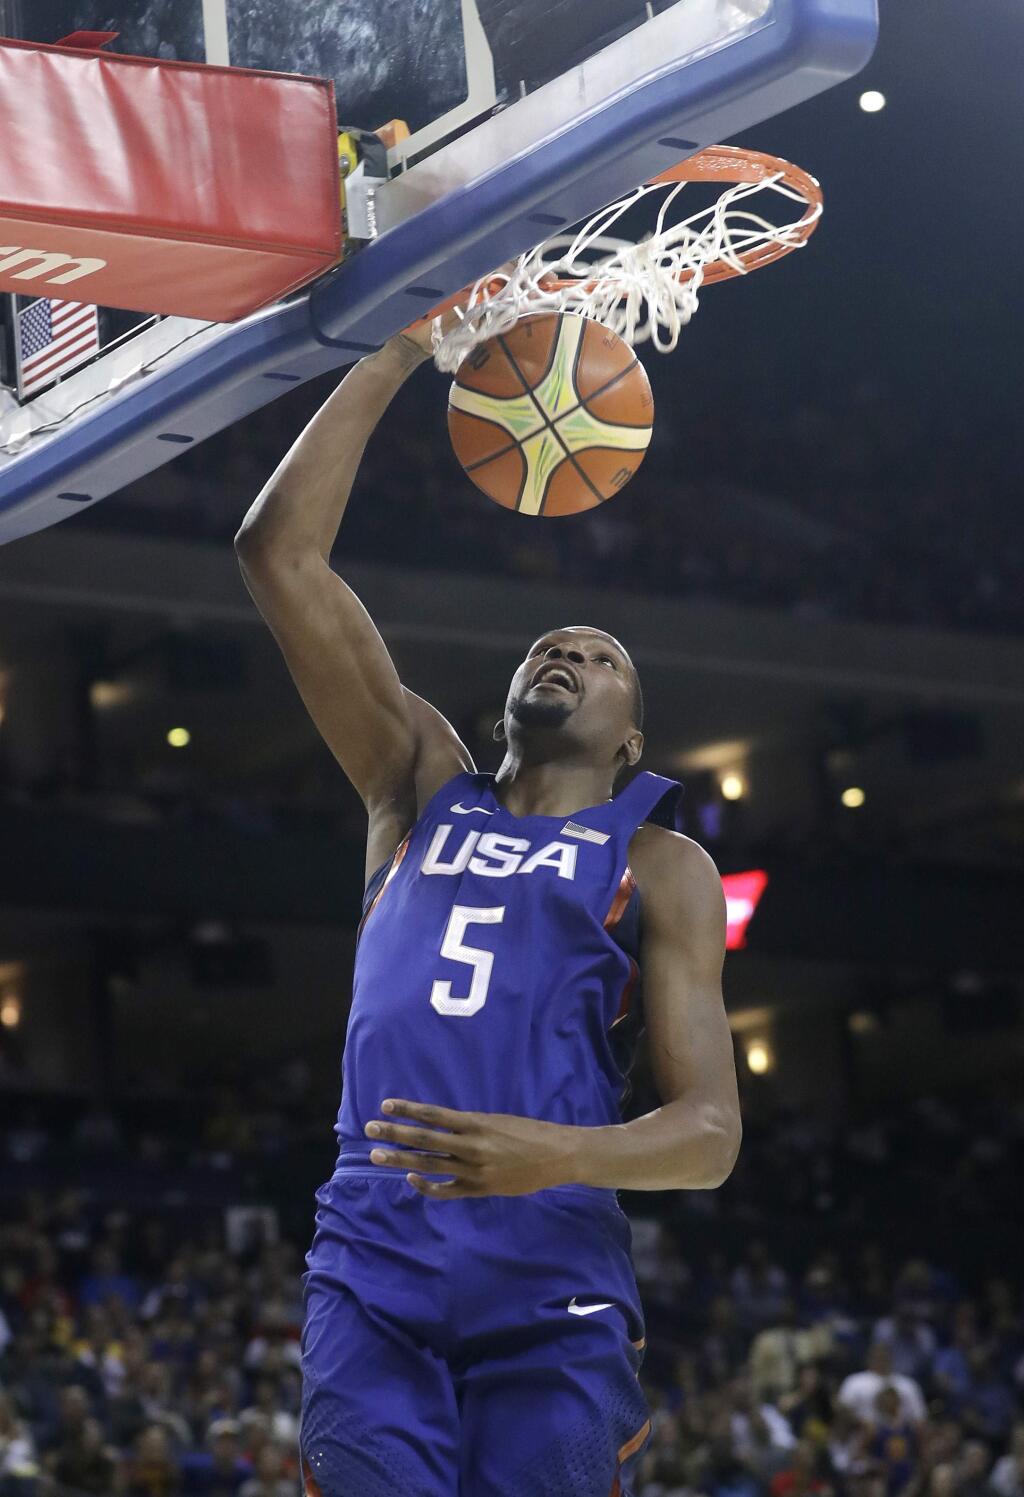 United States' Kevin Durant dunks against China during the first half of an exhibition basketball game Tuesday, July 26, 2016, in Oakland, Calif. (AP Photo/Marcio Jose Sanchez)